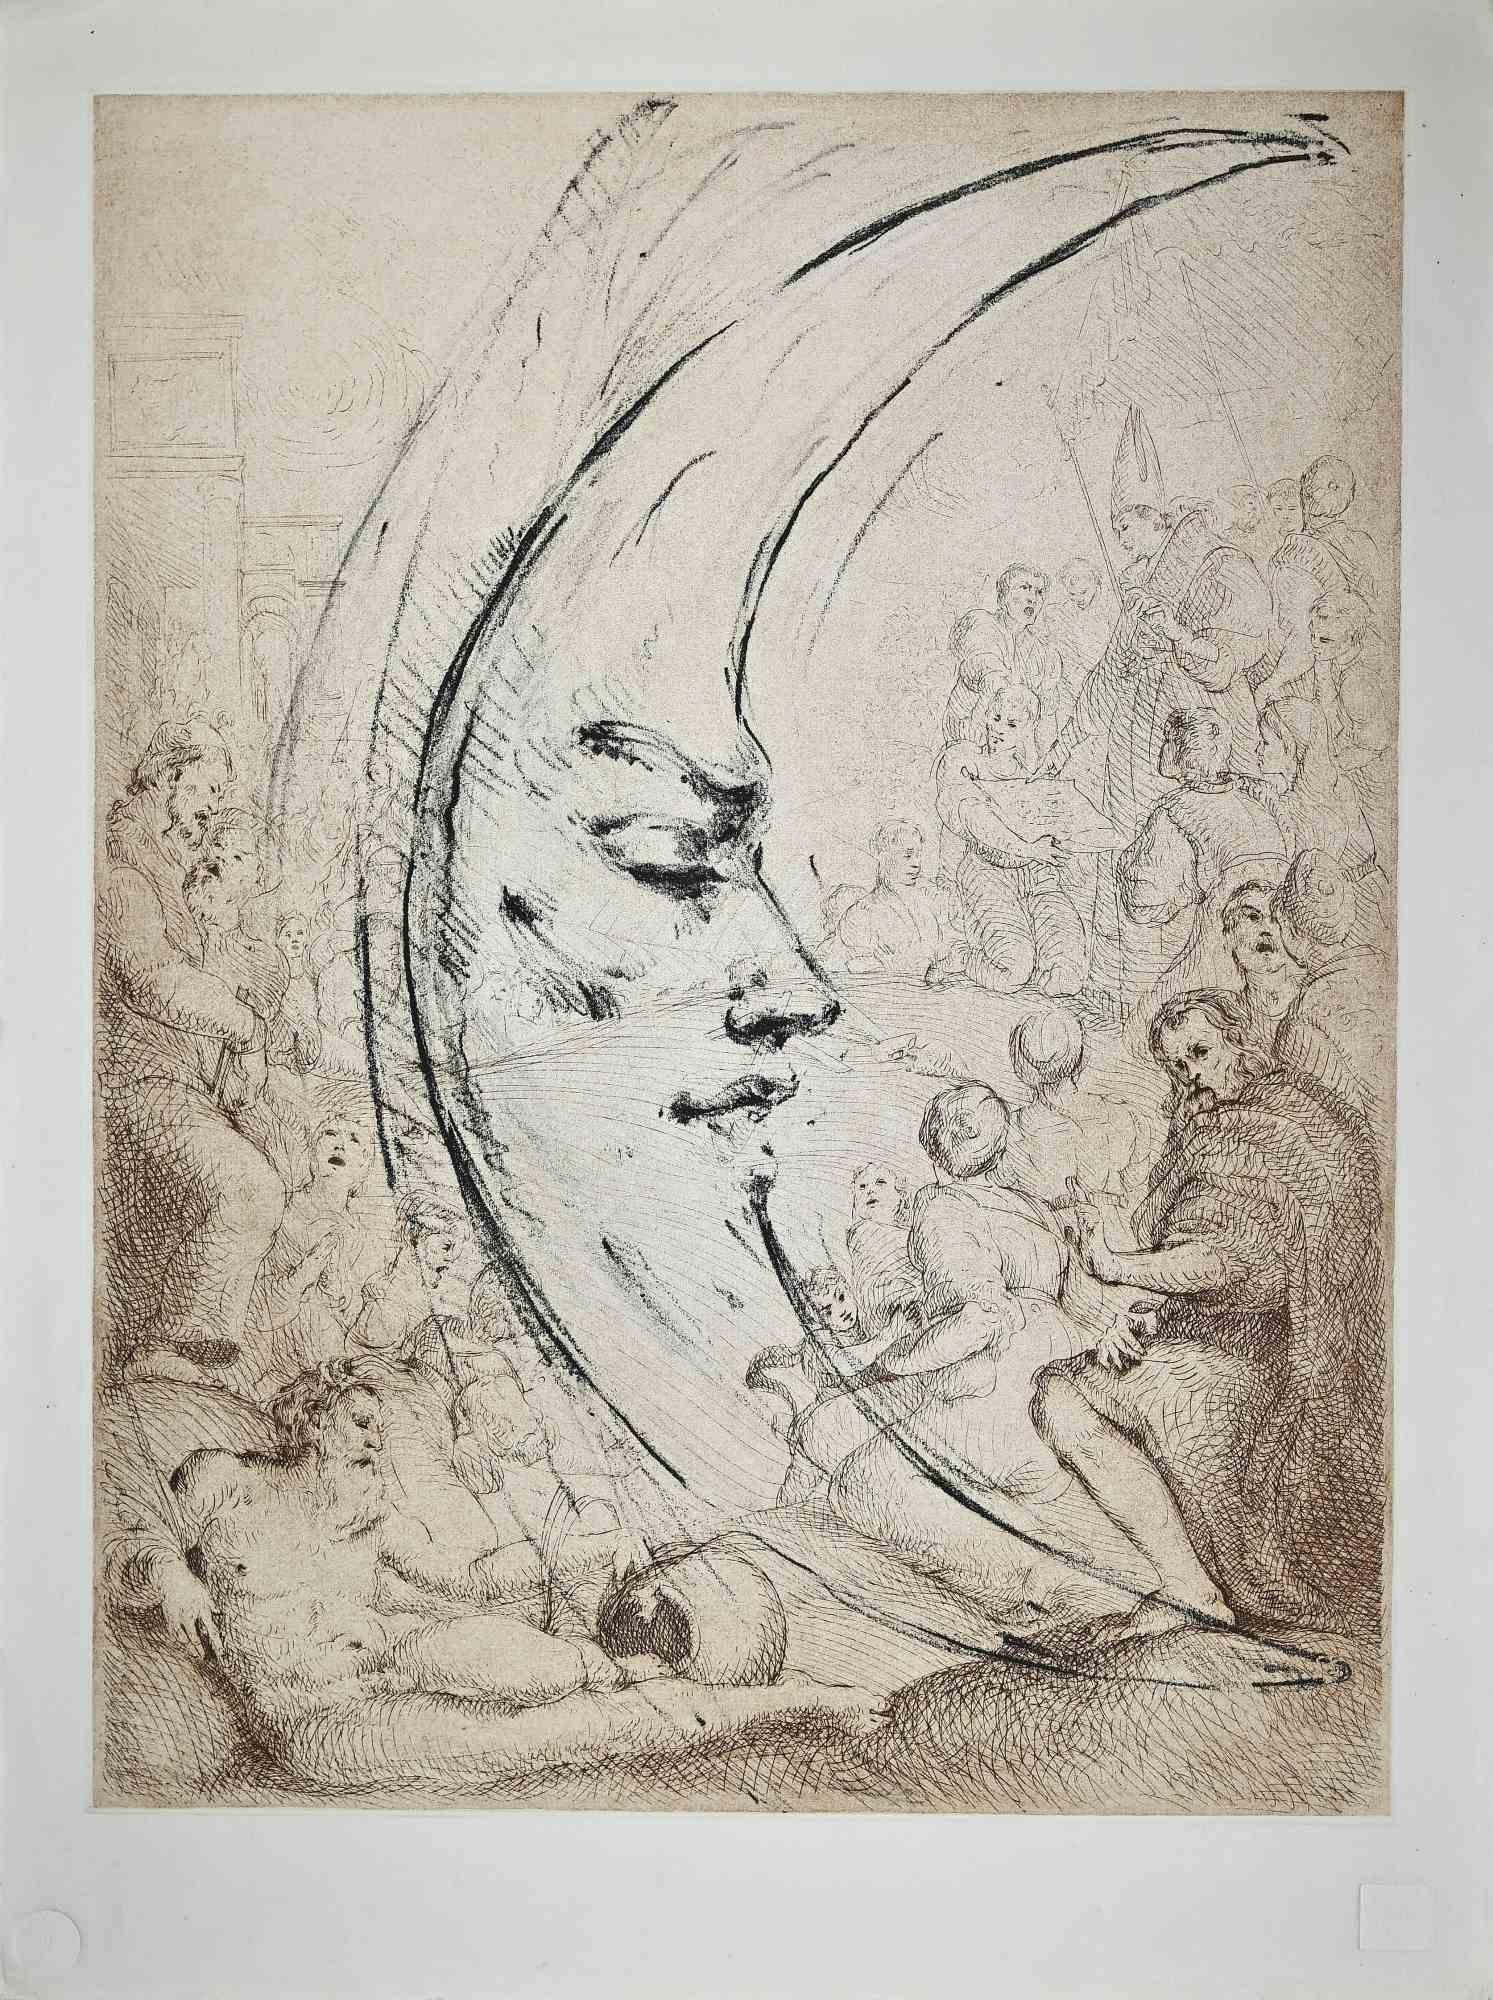 Half Moon is an original etching realized by the Italian artist Massimo Pulini. From the edition of 50 prints.

Good conditions.

The artwork is represented through great creative imagination by deft and quick strokes.